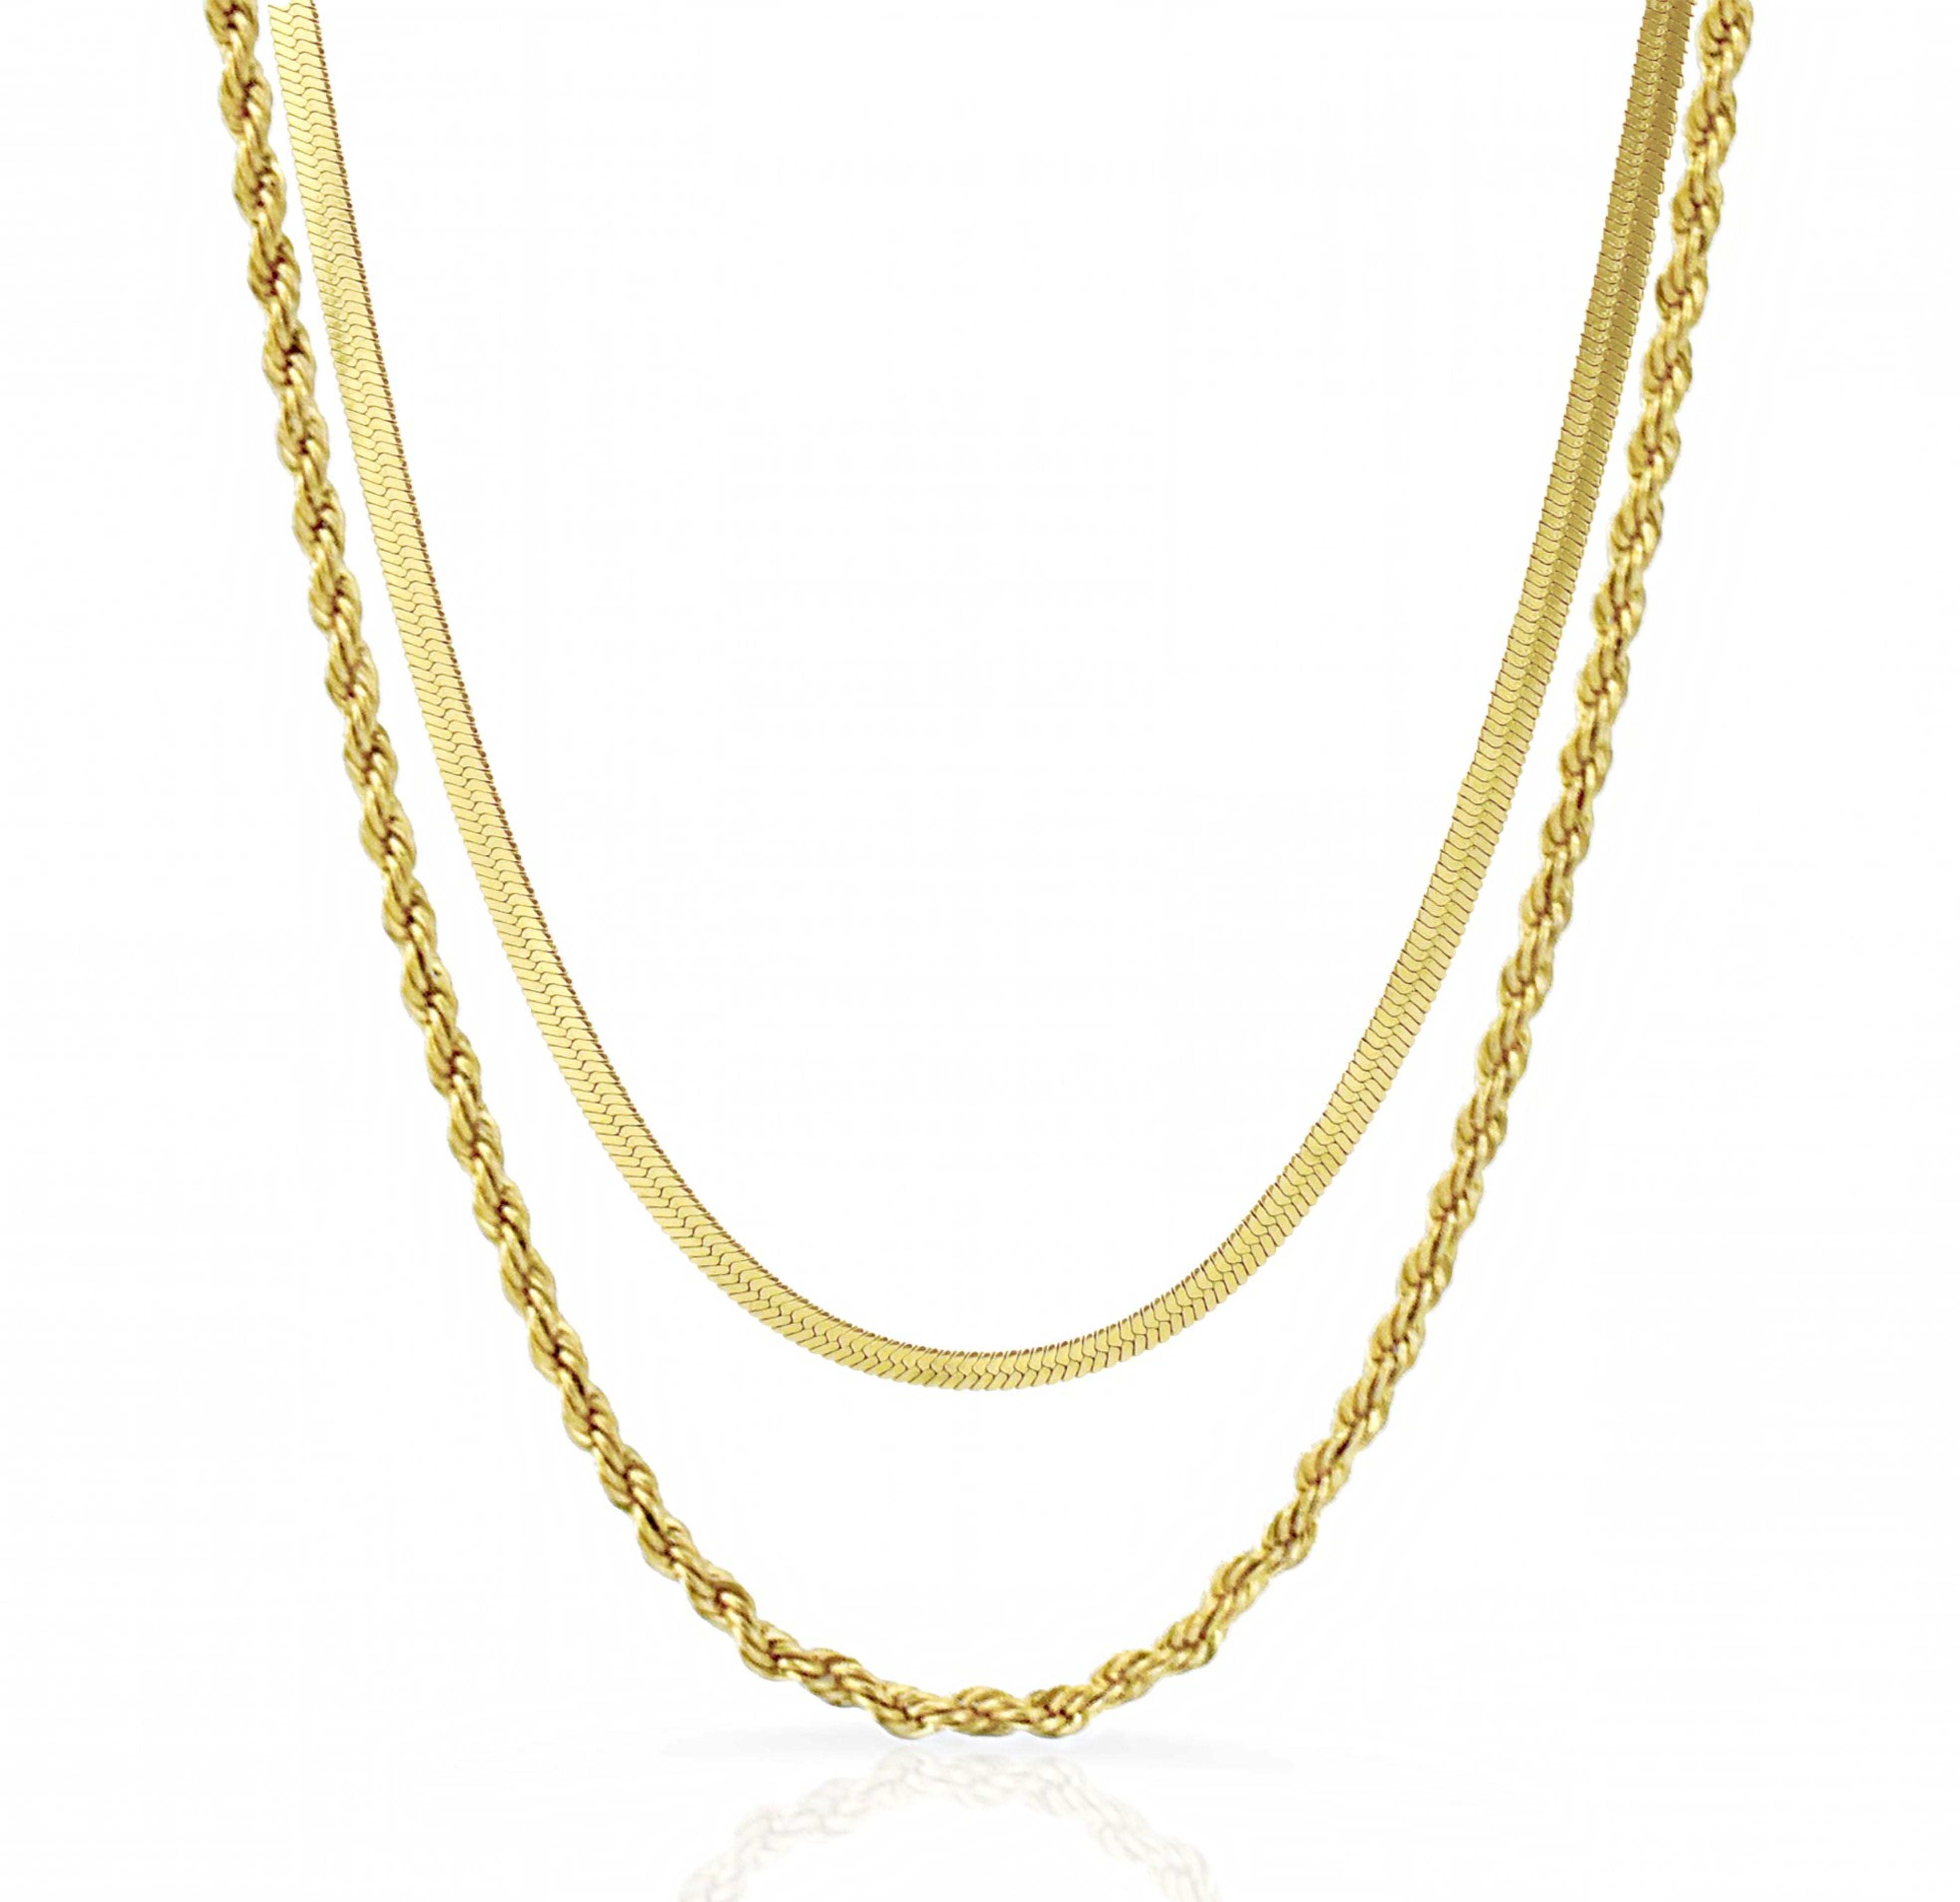 gold chain necklace stack waterproof